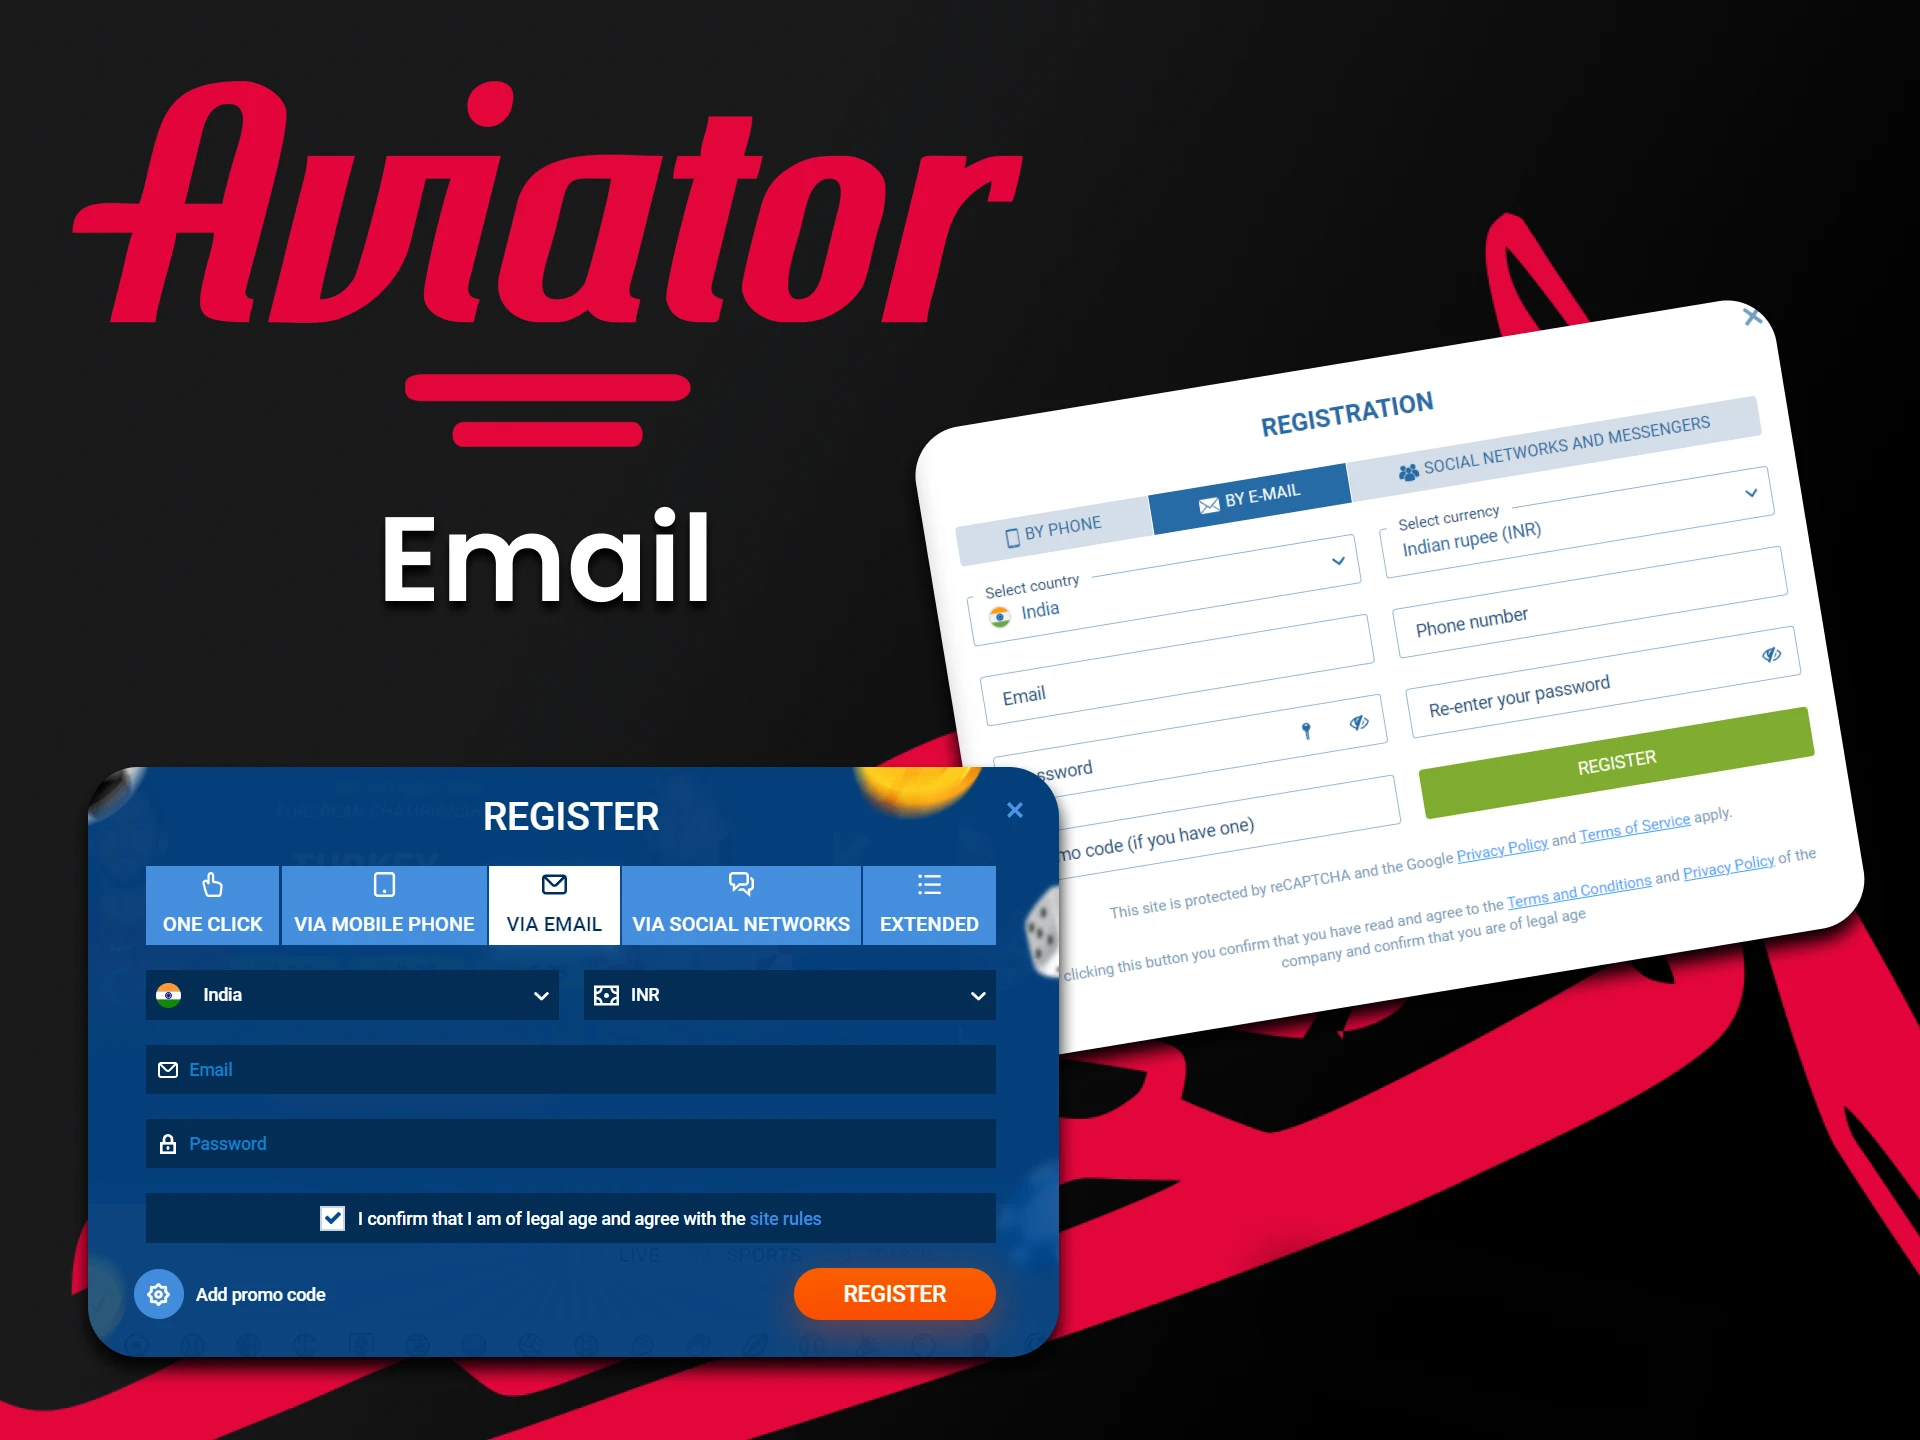 You can create an account via mail to play Aviator.